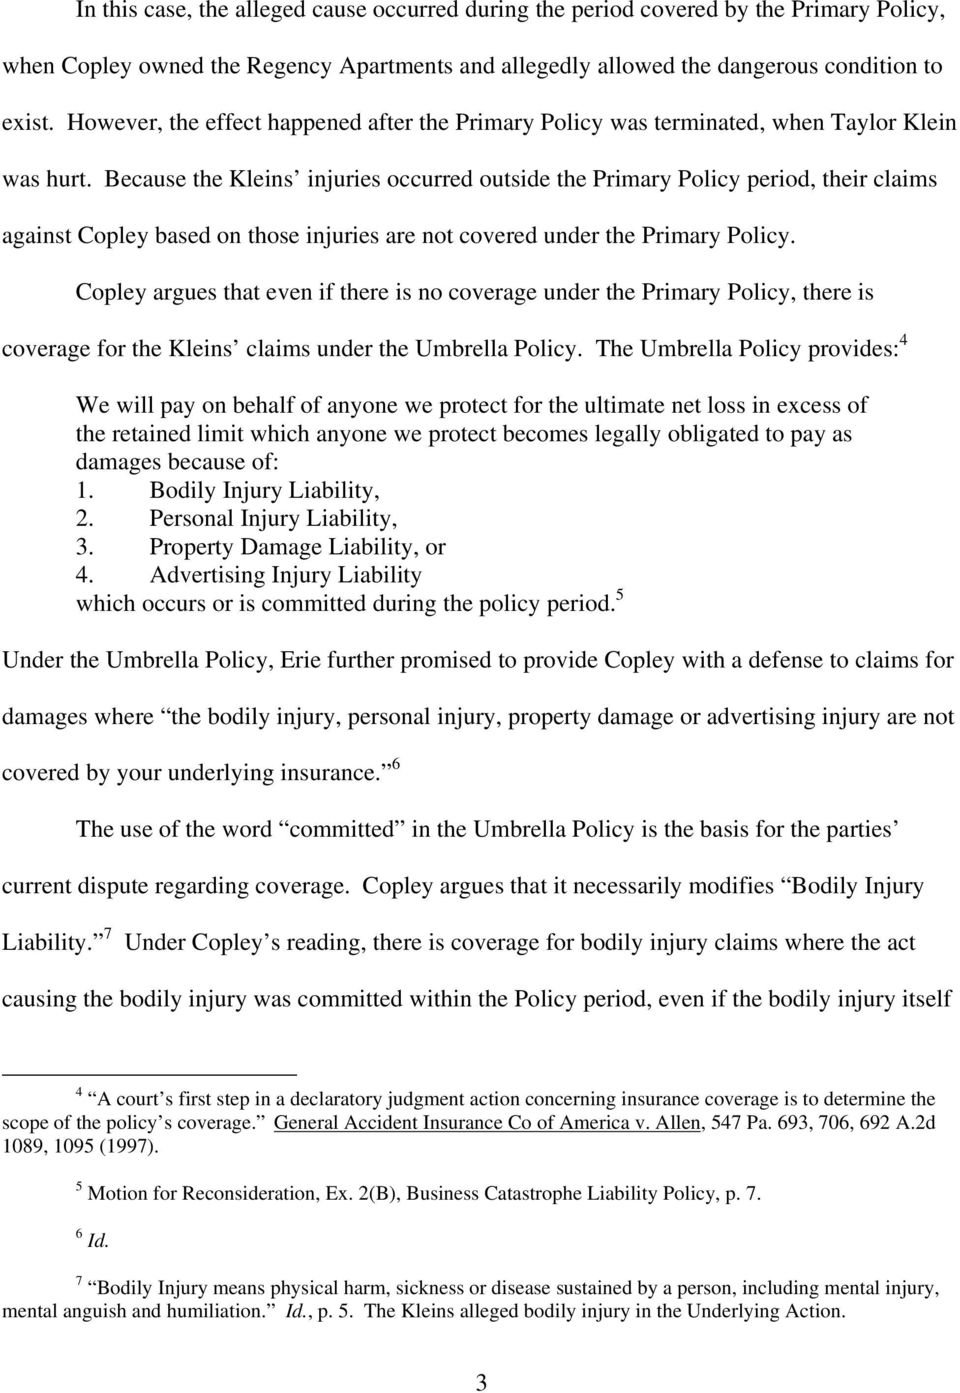 Because the Kleins injuries occurred outside the Primary Policy period, their claims against Copley based on those injuries are not covered under the Primary Policy.